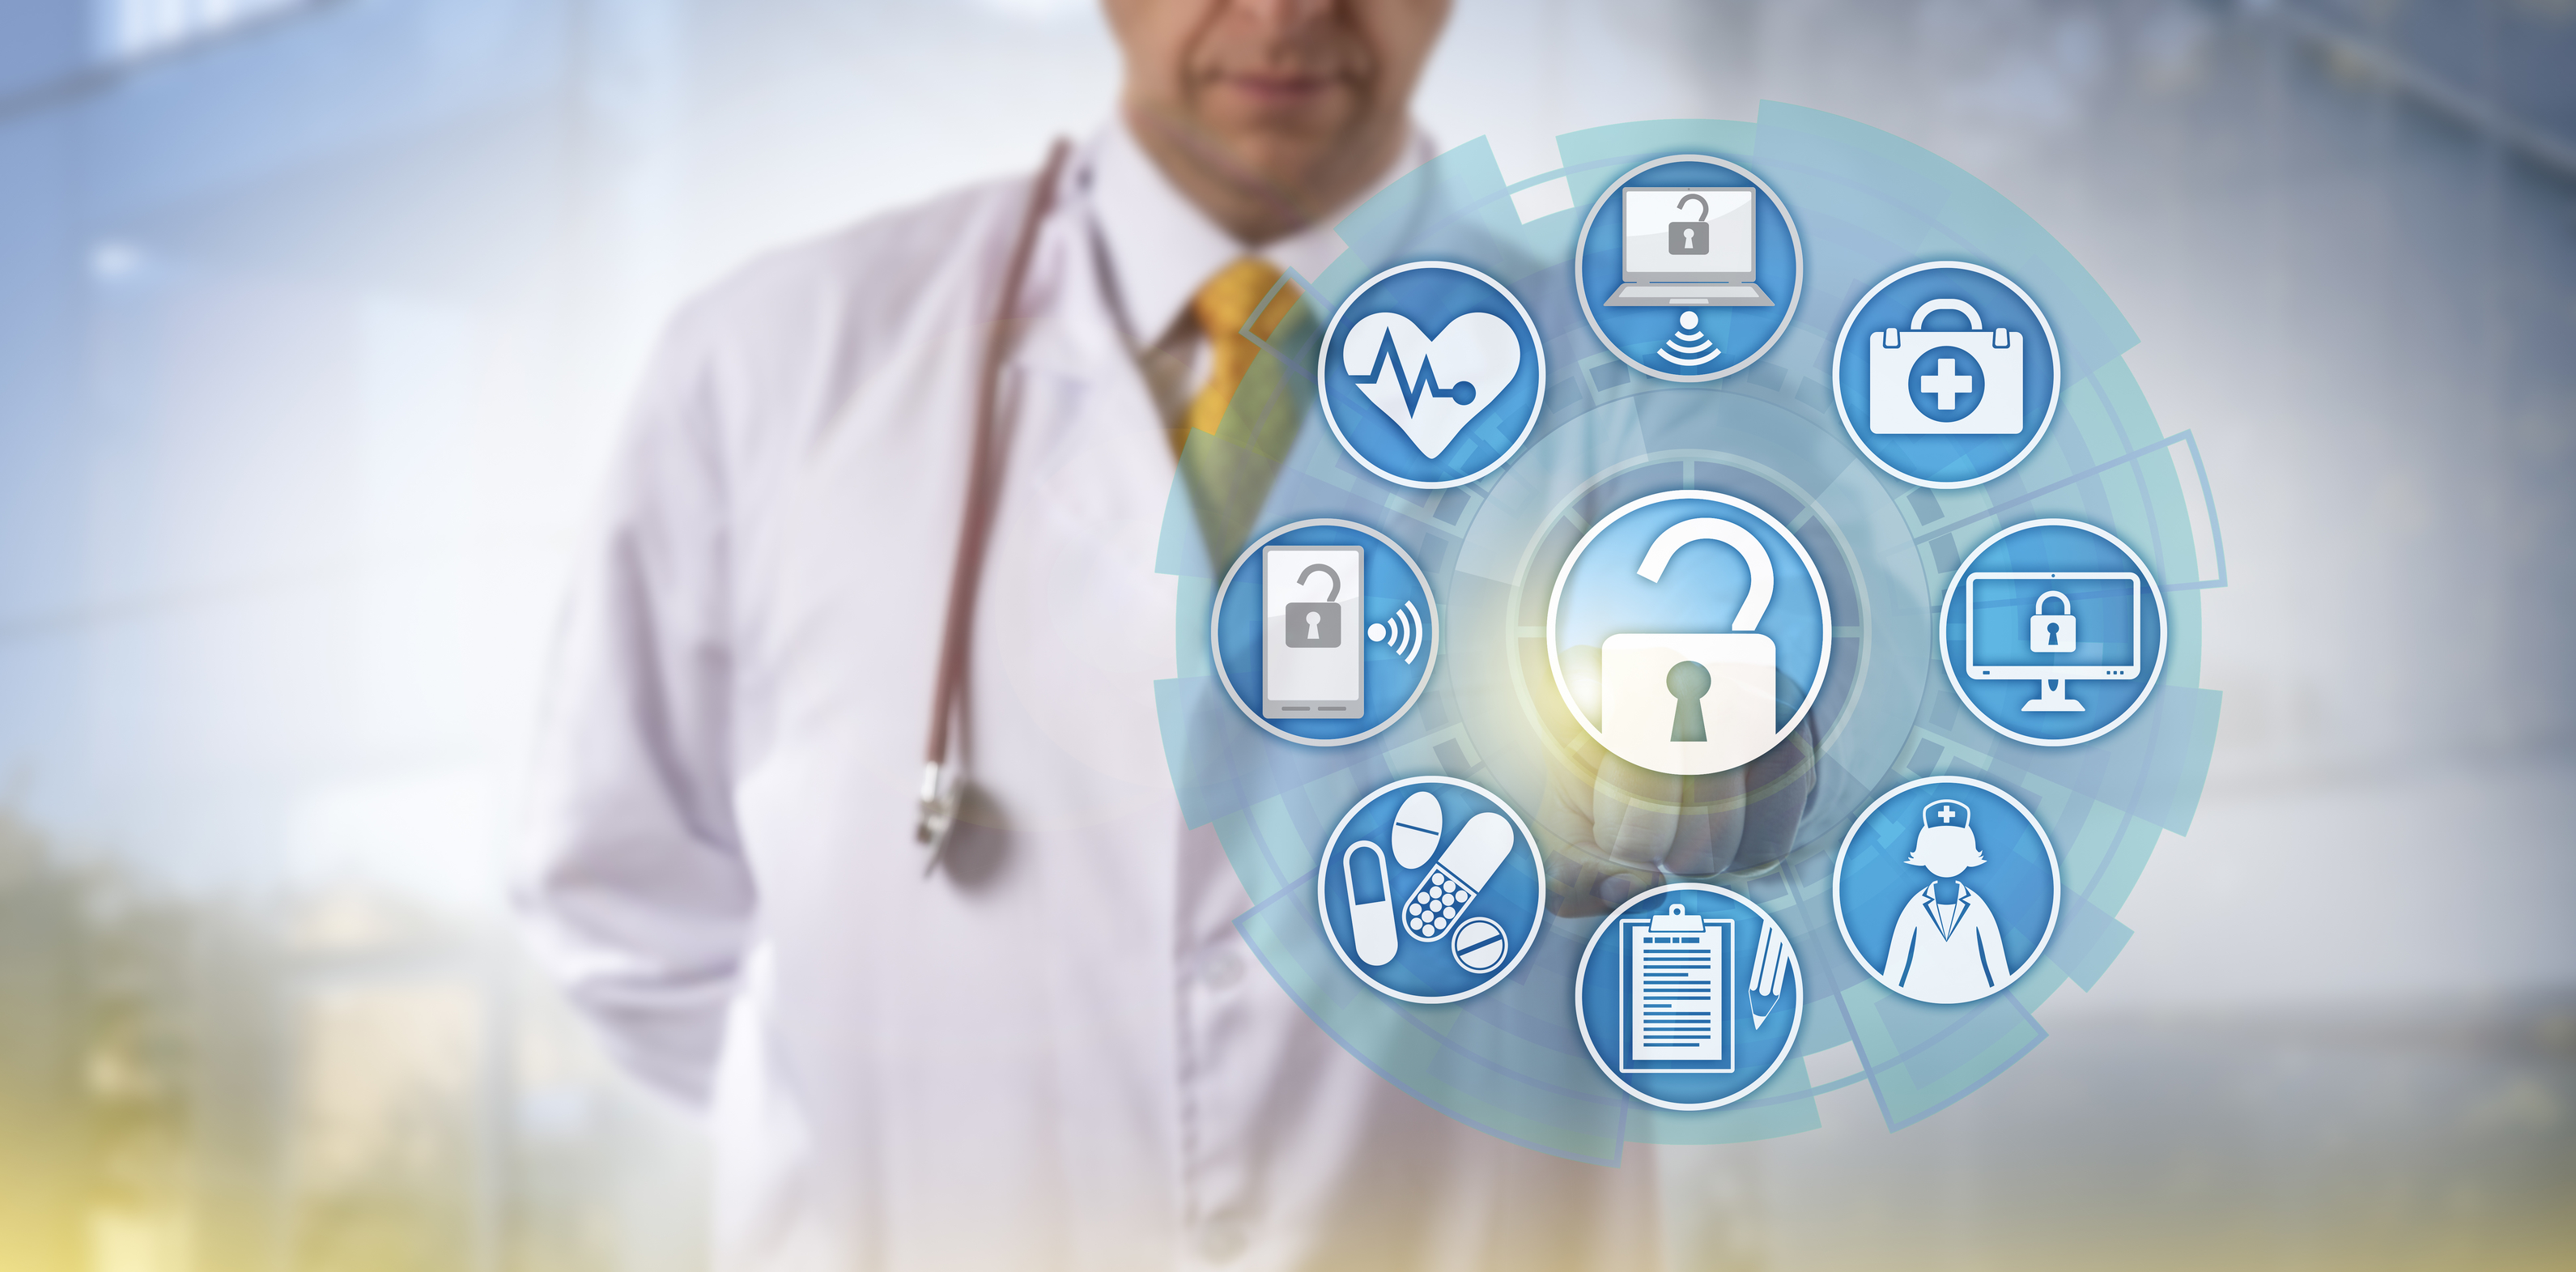 The Impact of IoT on Healthcare: Connected Medical Devices and Remote